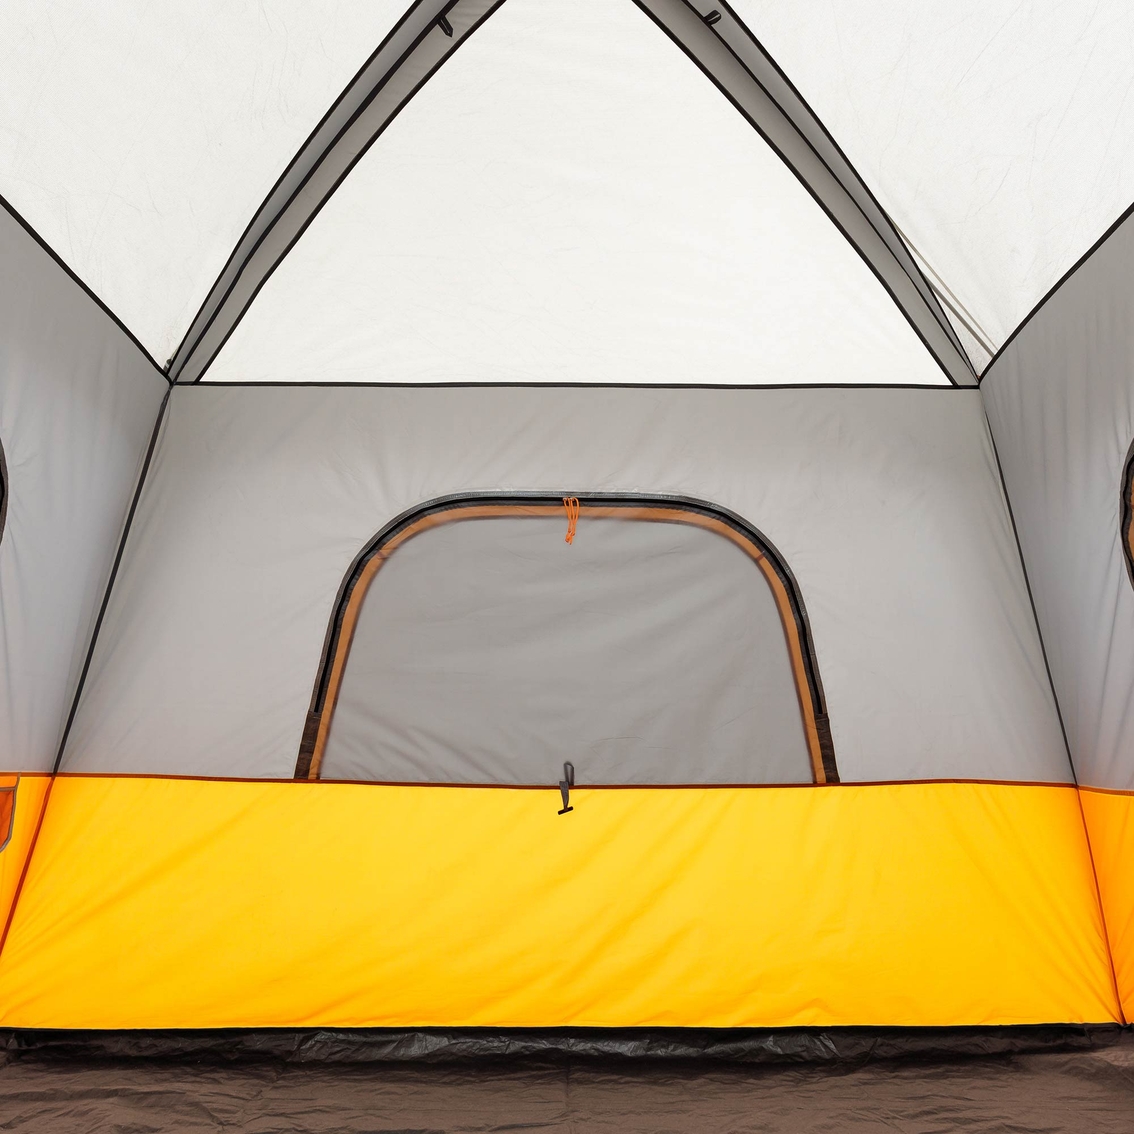 Core Equipment 6 Person Straight Wall Cabin Tent - Image 8 of 10